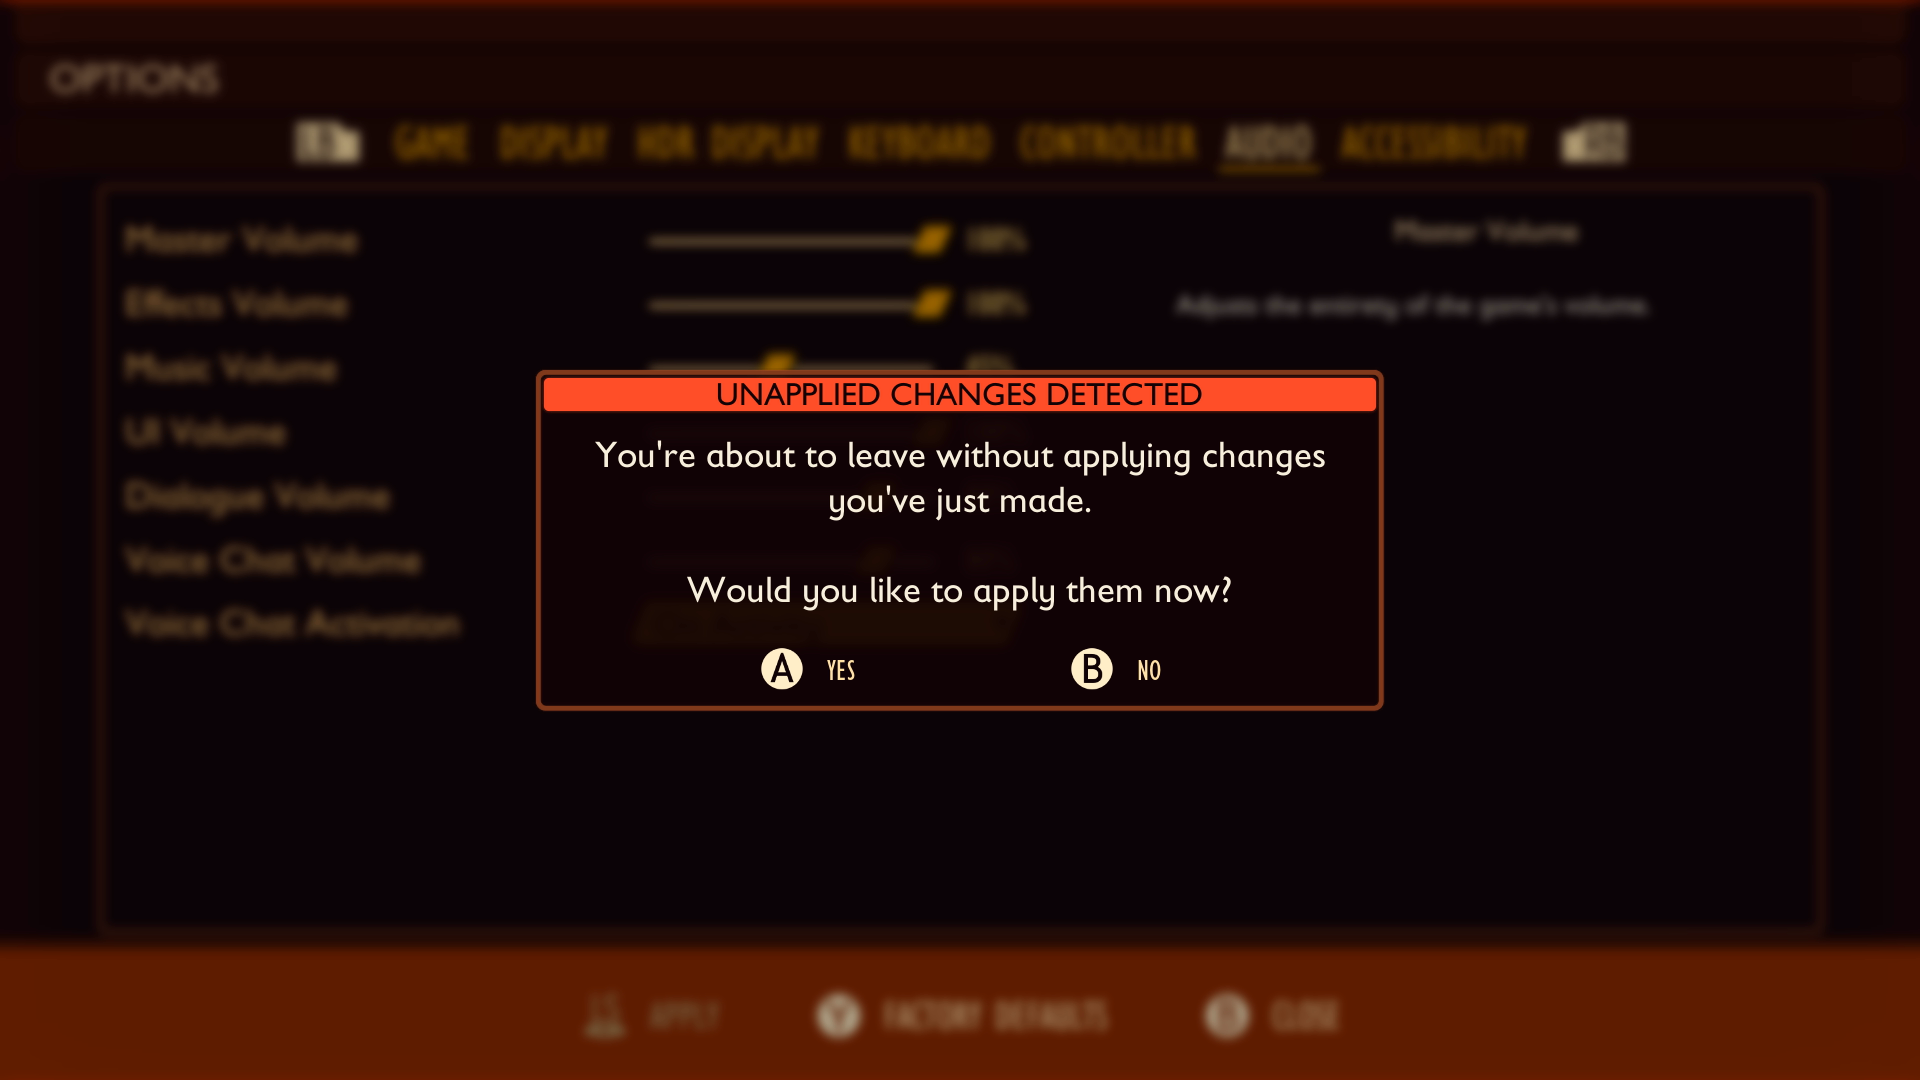 A screenshot from Grounded. A warning dialog box appears that reads "Unapplied Changes Detected. You're about to leave without applying changes you've just made. Would you like to apply them now?"